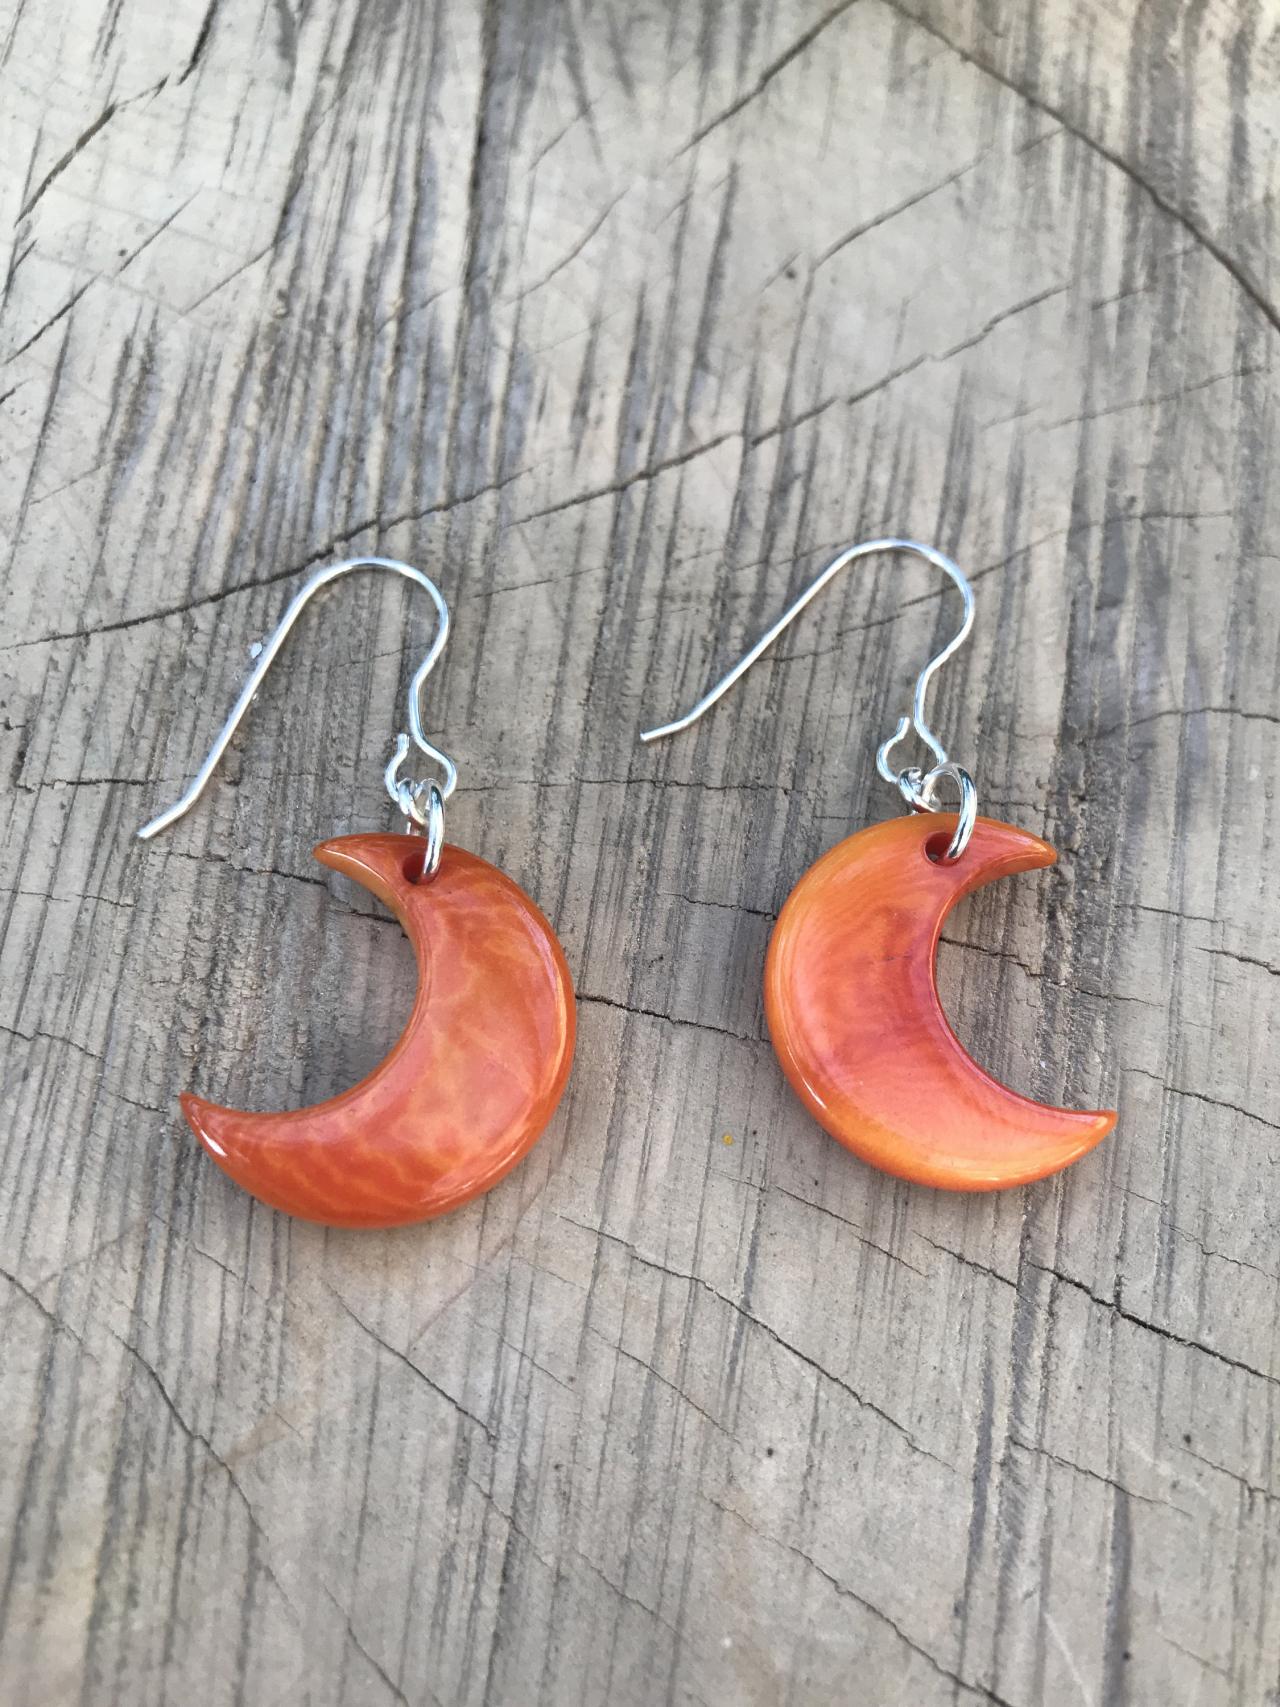 Orange Crescent Moon Tagua Nut (vegetable Ivory) Dangle Earrings With Large Sterling Silver Wires.